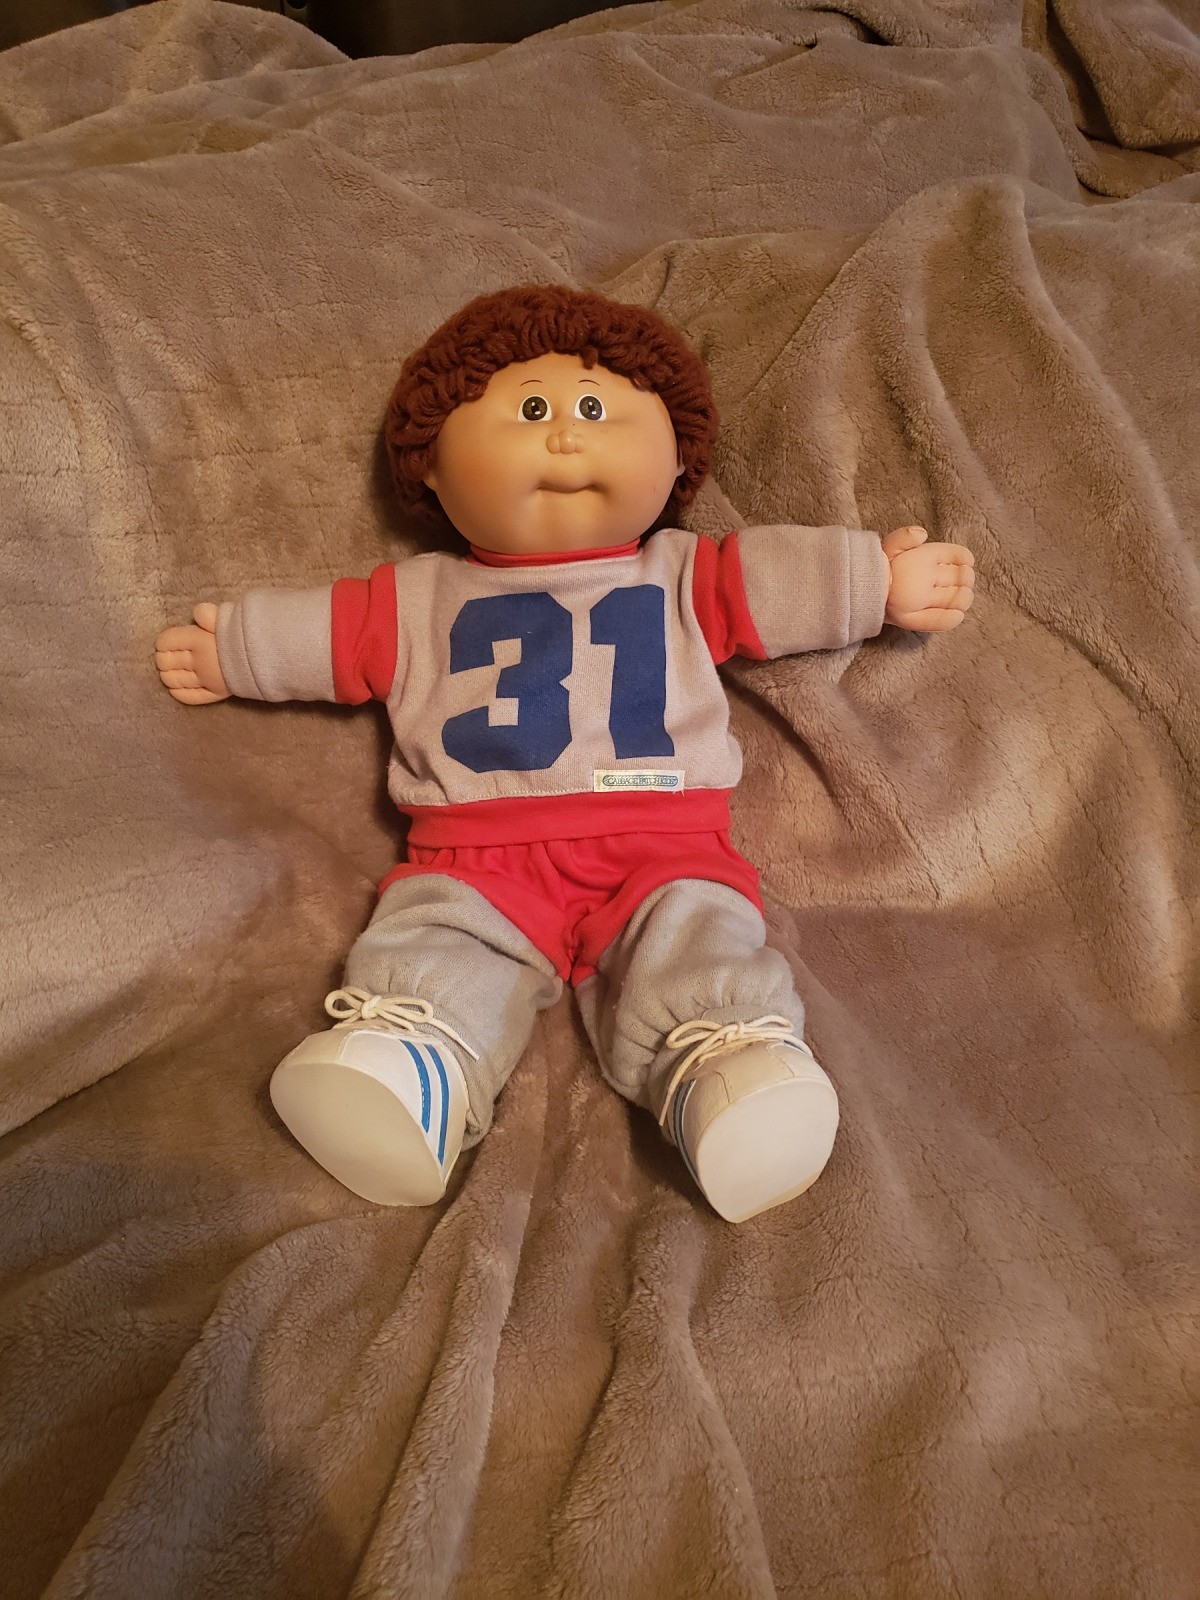 selling-a-vintage-cabbage-patch-doll-thriftyfun